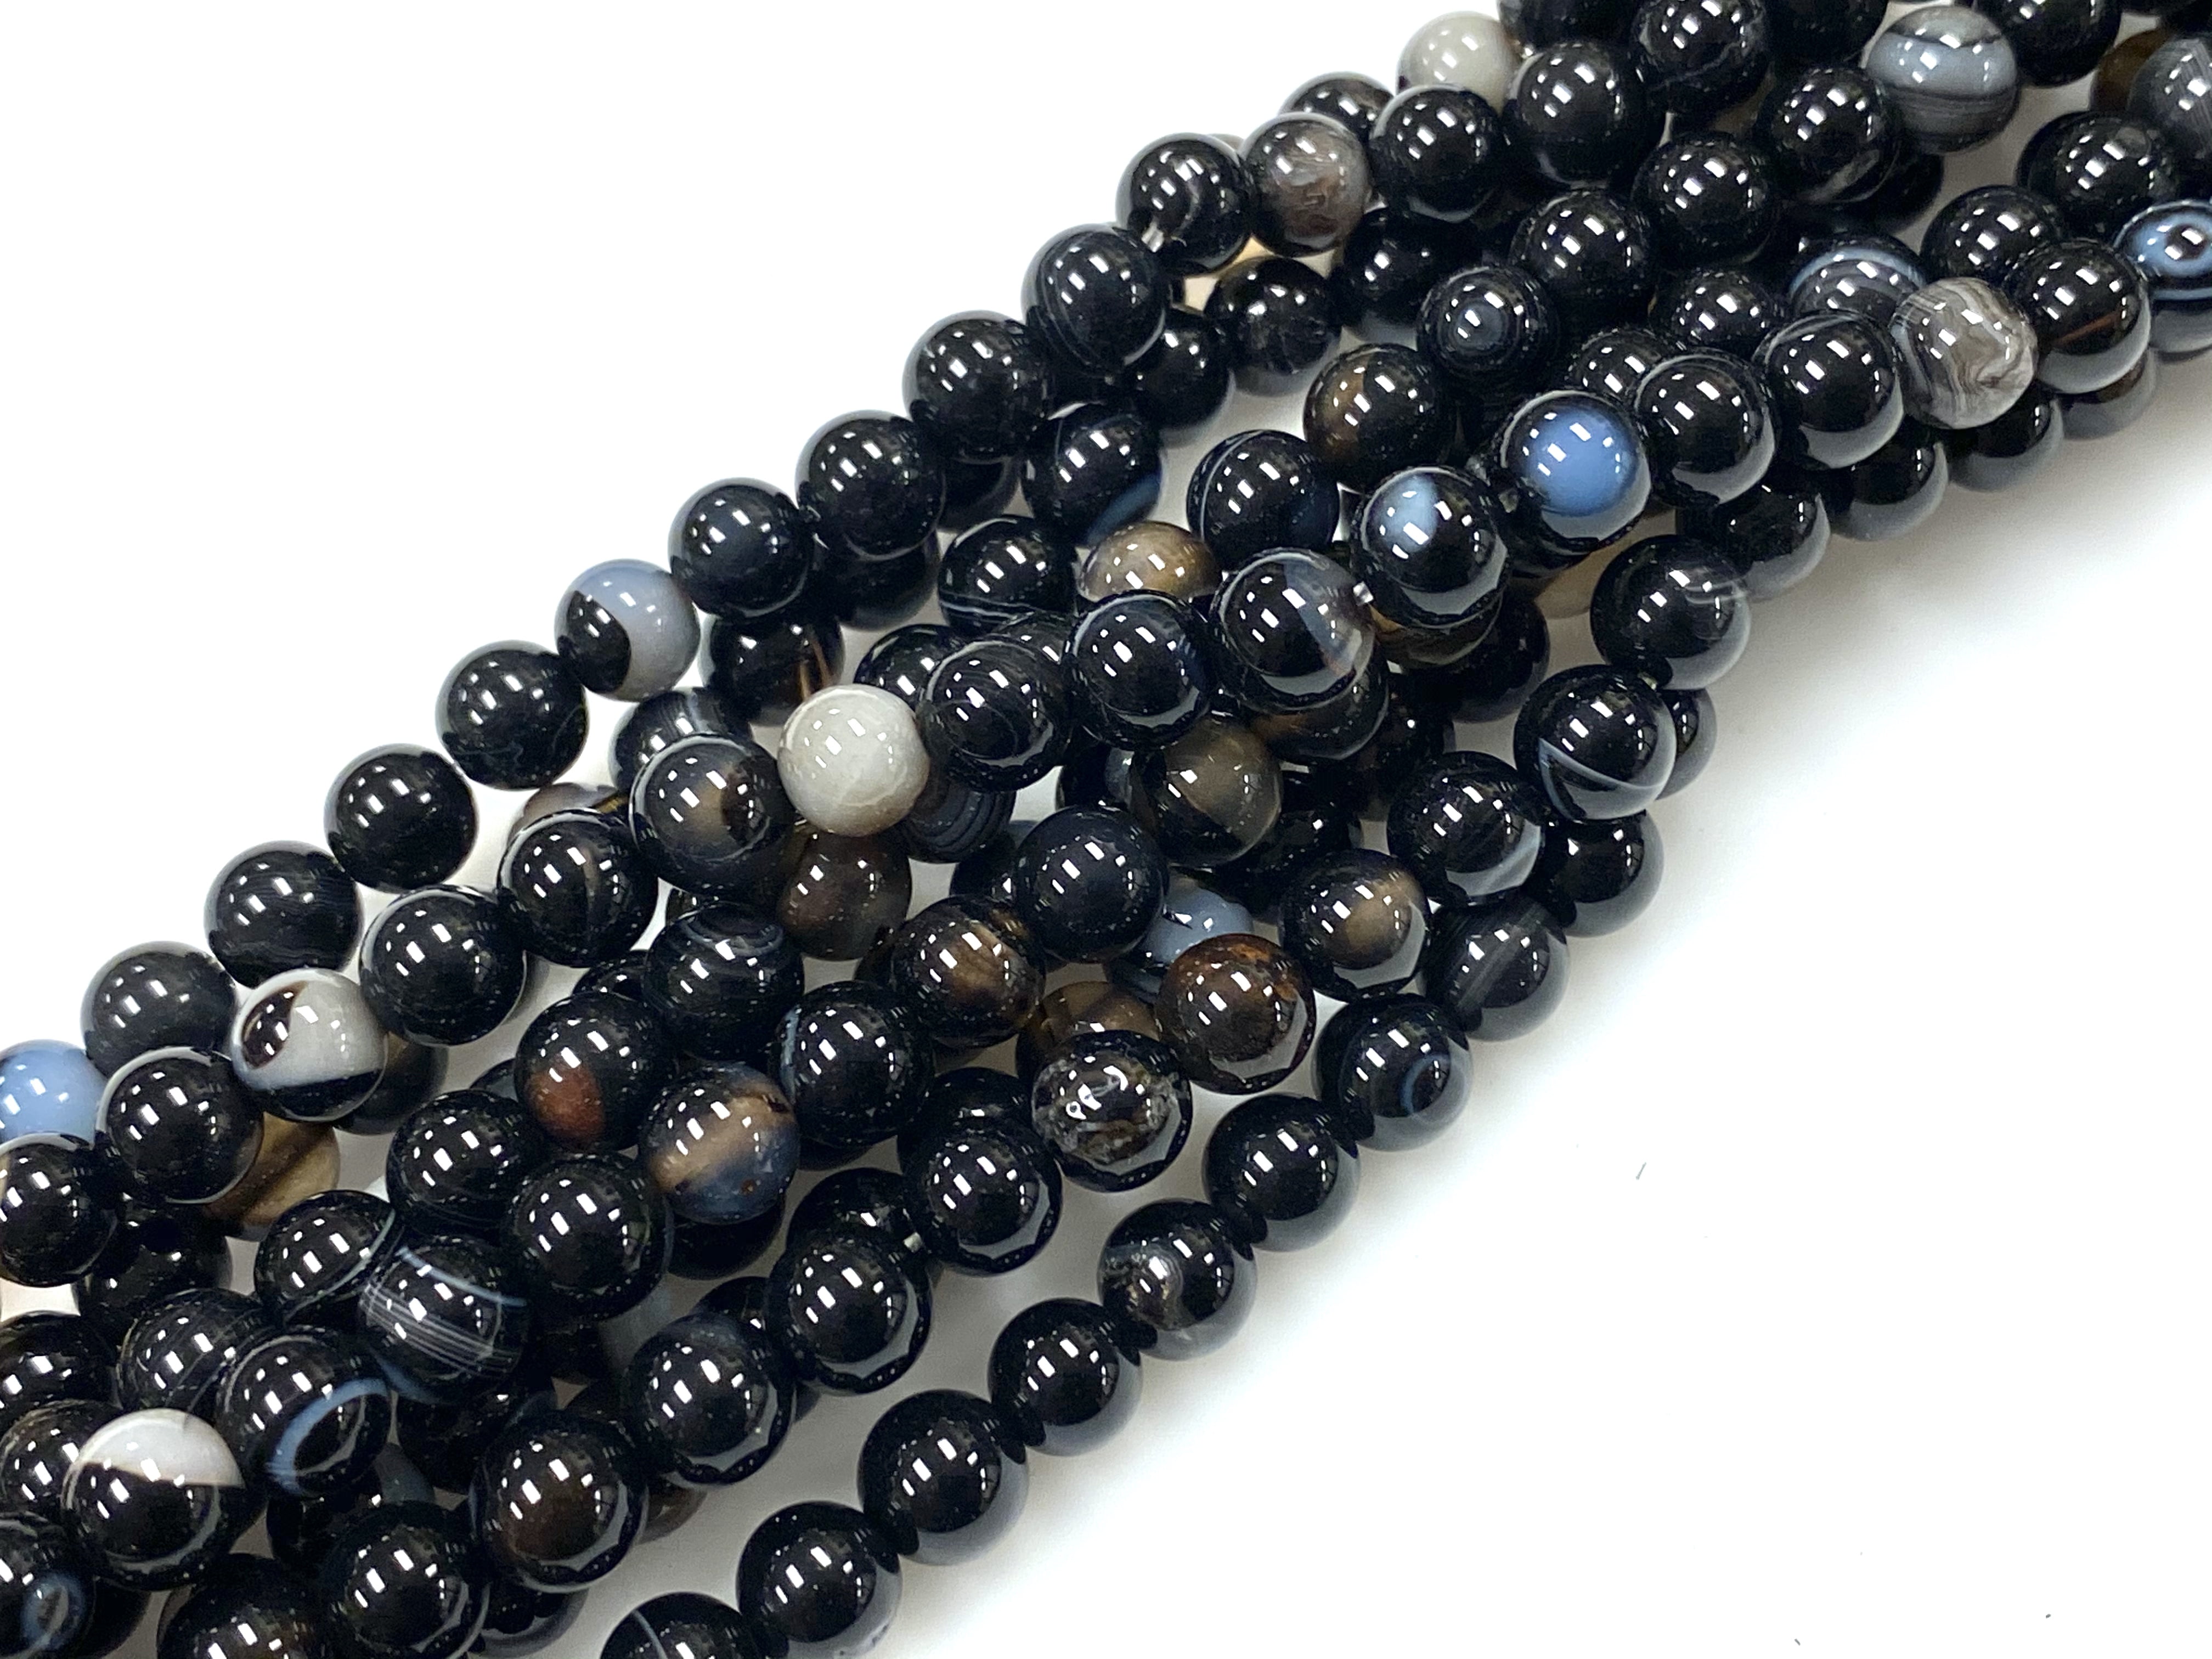 Black Stripe Agate Beads Sizes 6mm 8mm 10mm 12mm Natural Gemstone Smooth Round Beads